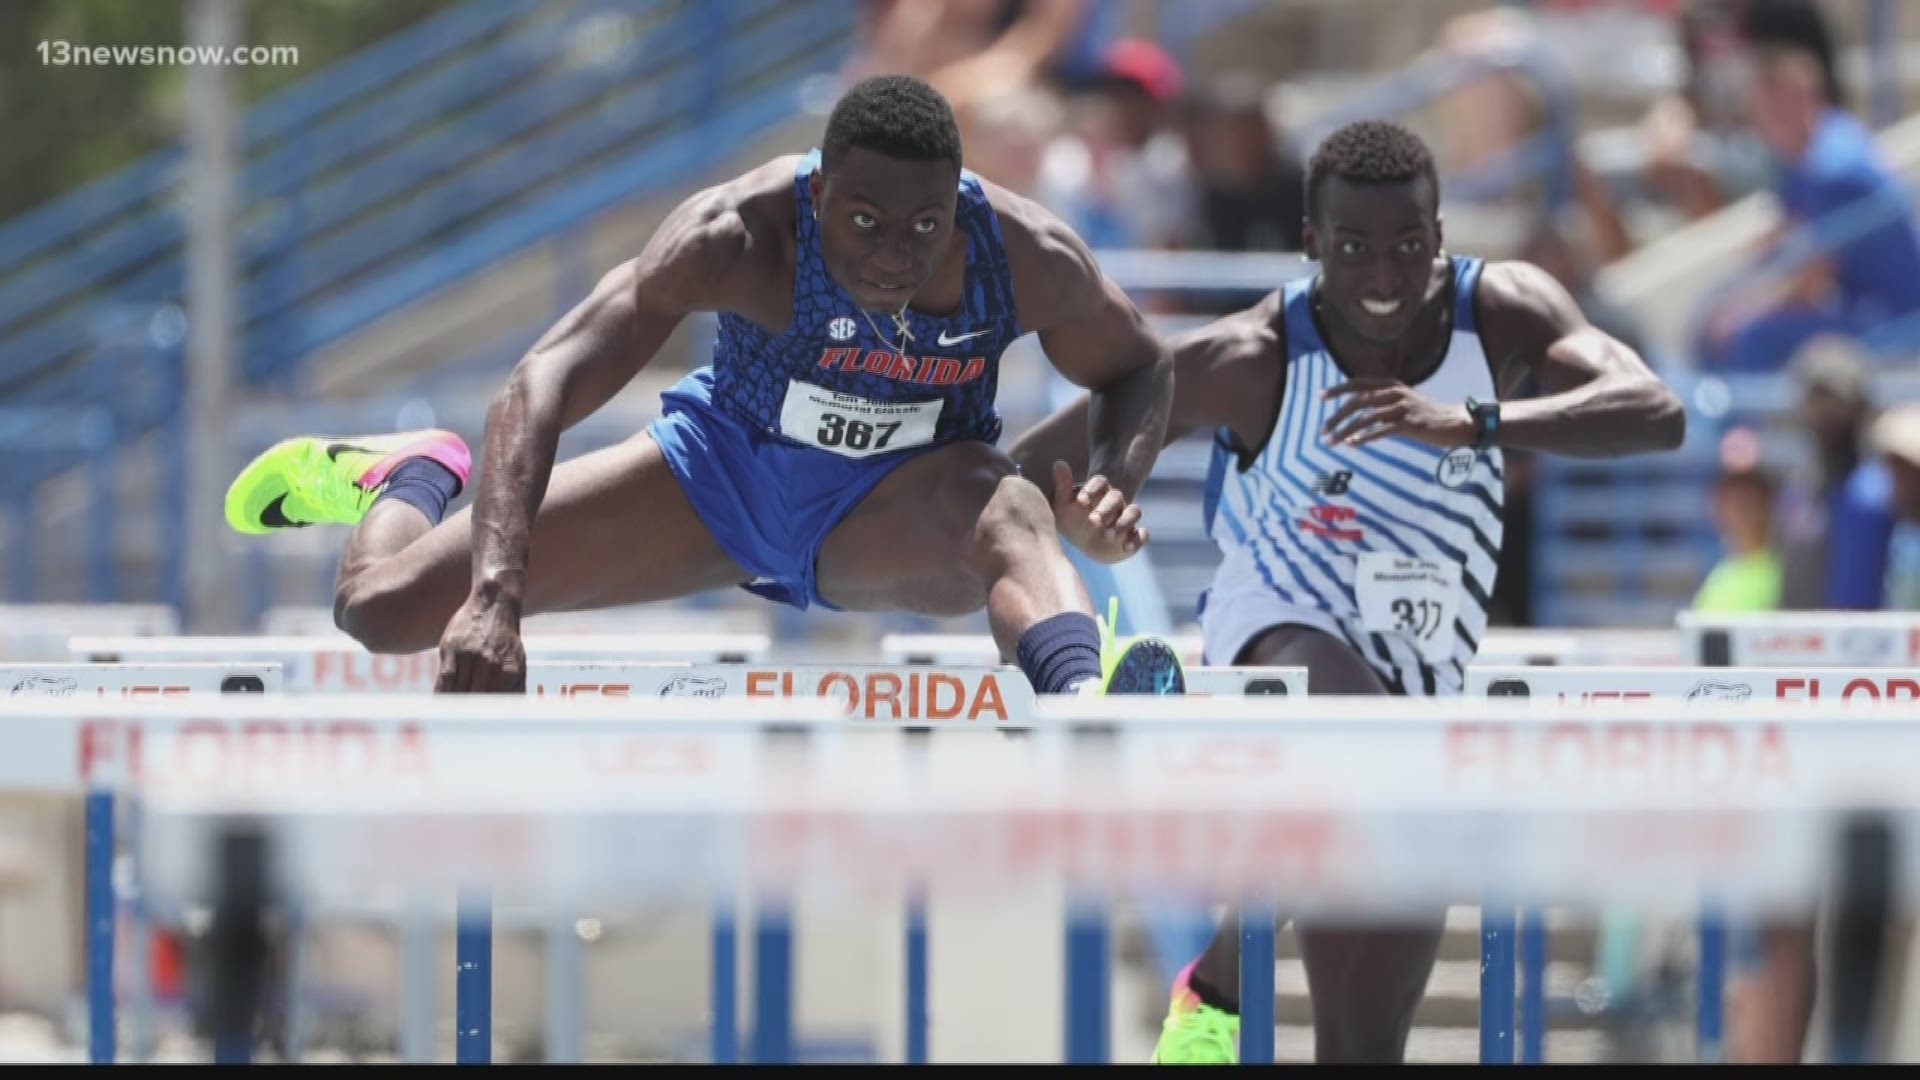 A Grassfield High alum, a freshman NCAA champ for Florida, Holloway recently ran the second fastest 110 m hurdles in collegiate history.